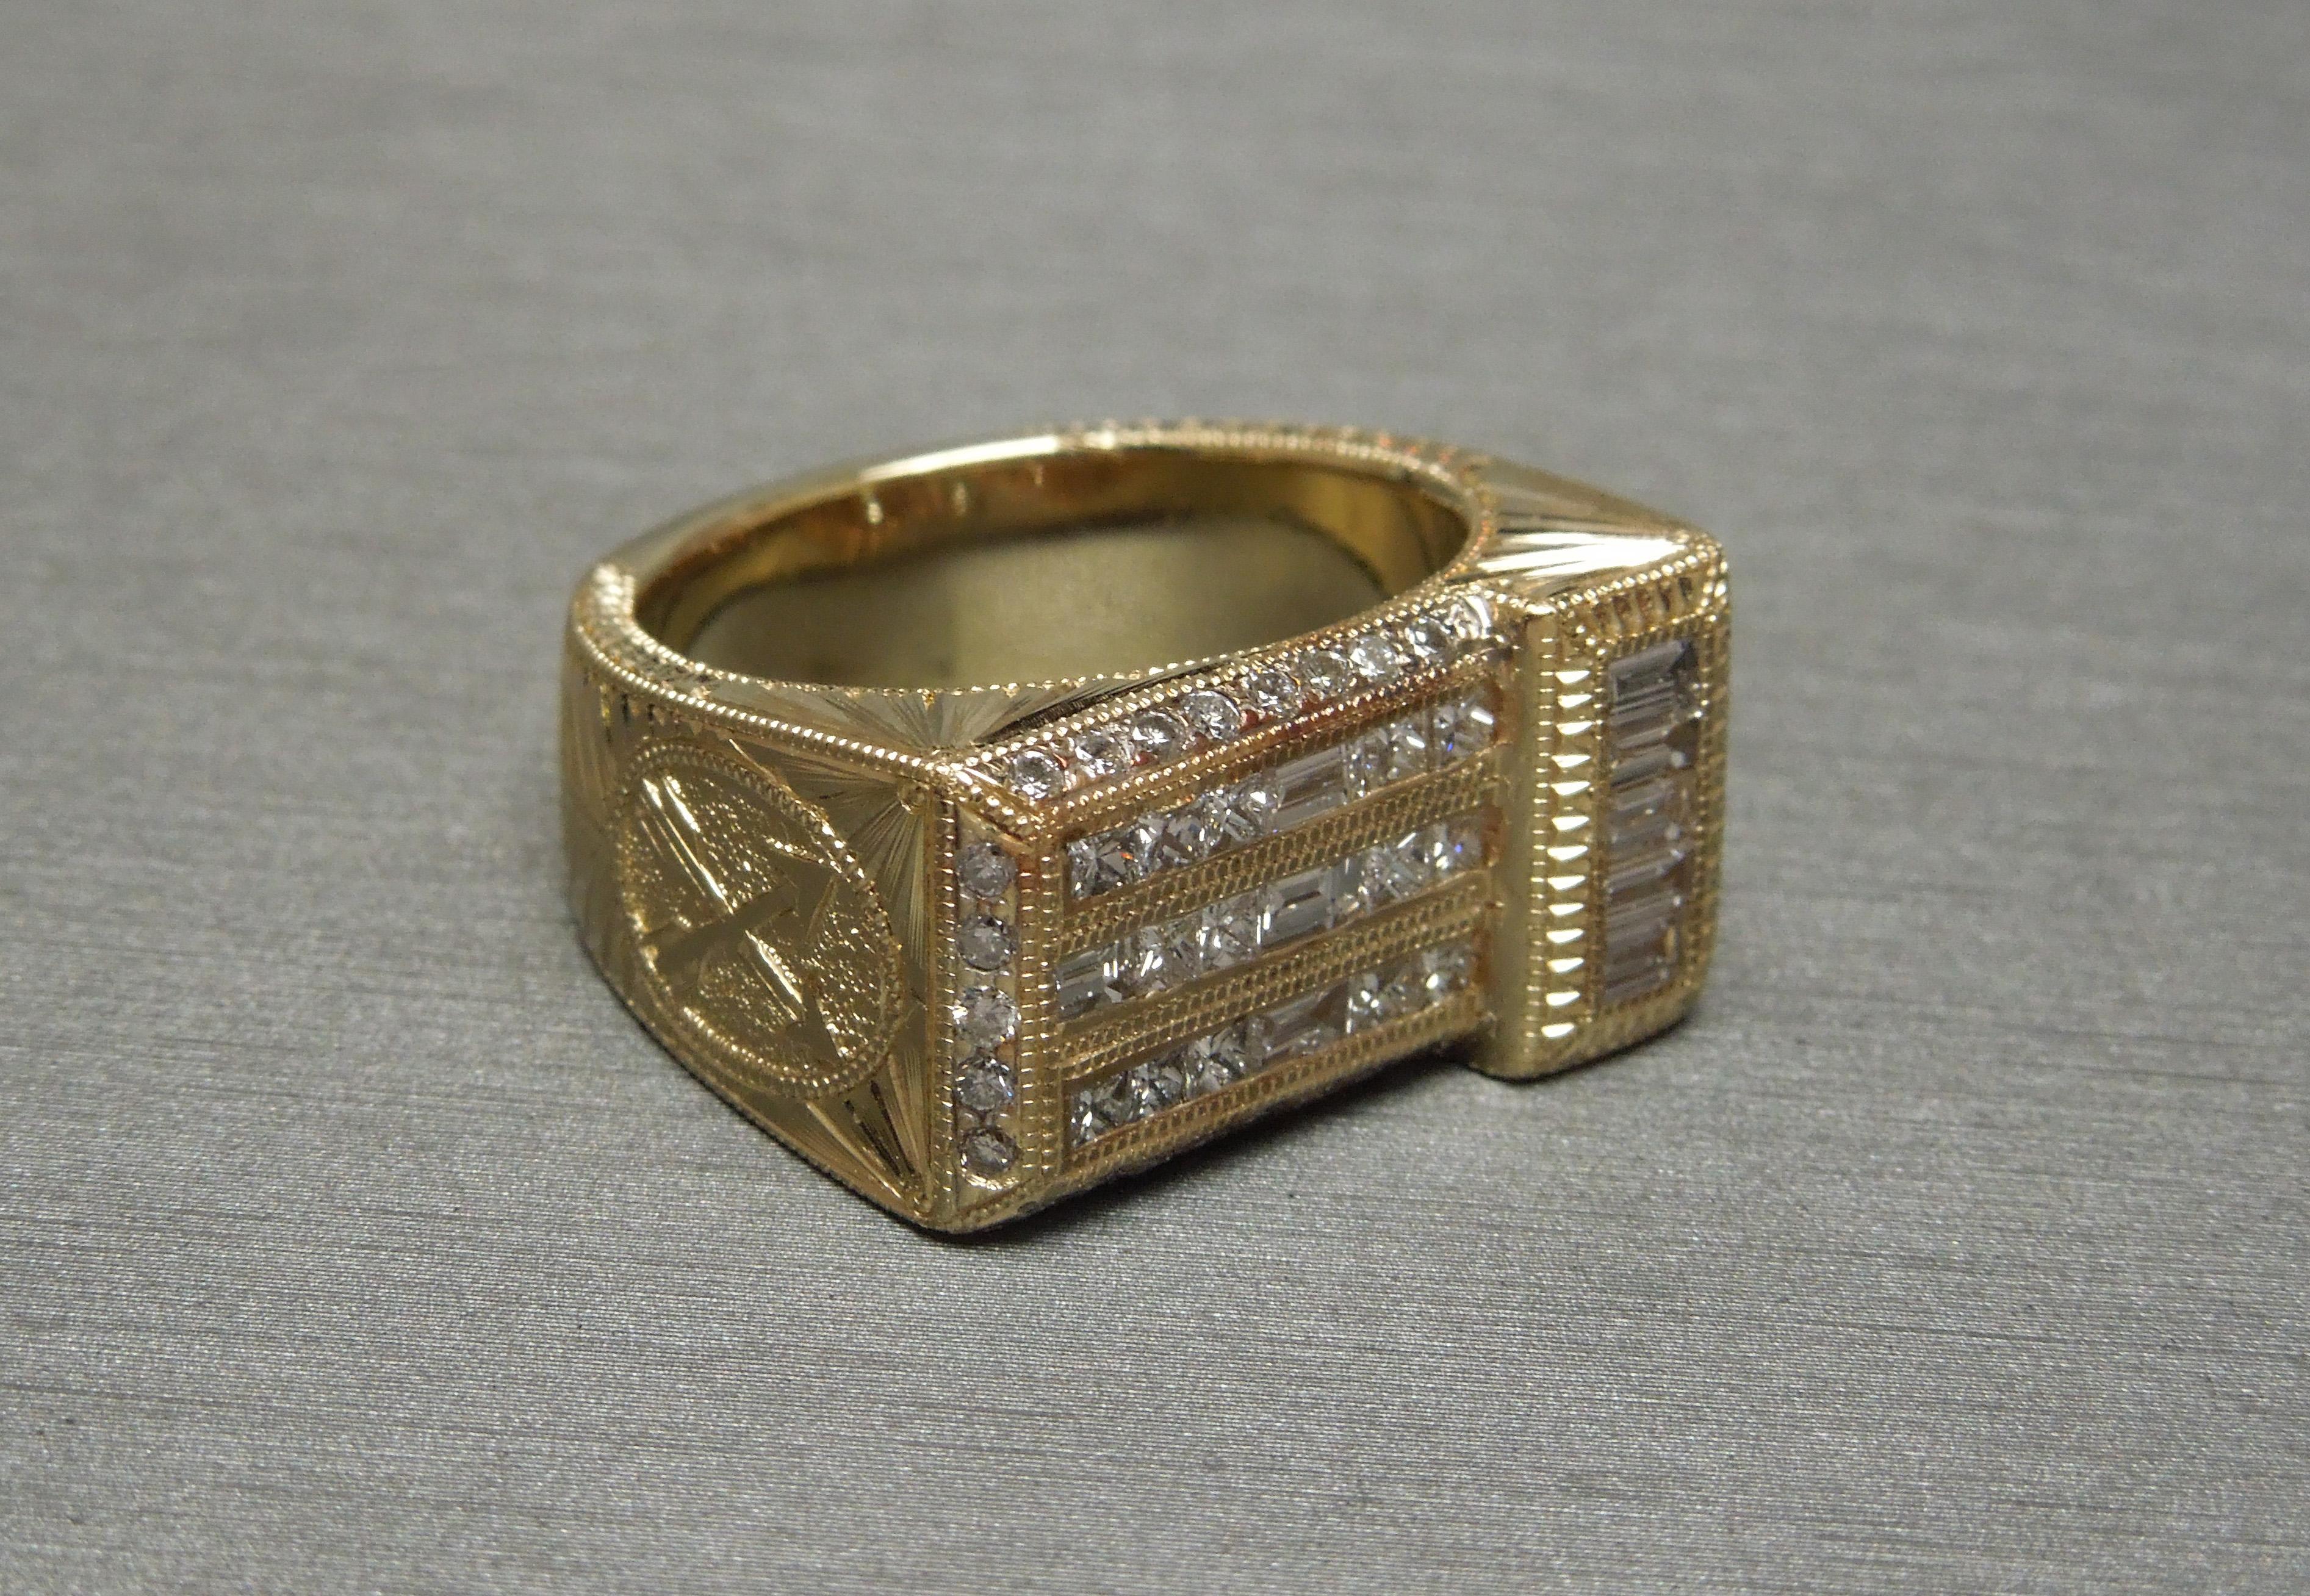 This Men's Roman Pompeii Diamond Ring features a total of 9 Baguettes totaling 1.10 carats ranking an F-G Color & VVS1-VVS2 Clarity. At central section Baguettes alternate with a total of 14 Square Princess cuts totaling 0.60 carats ranking a G